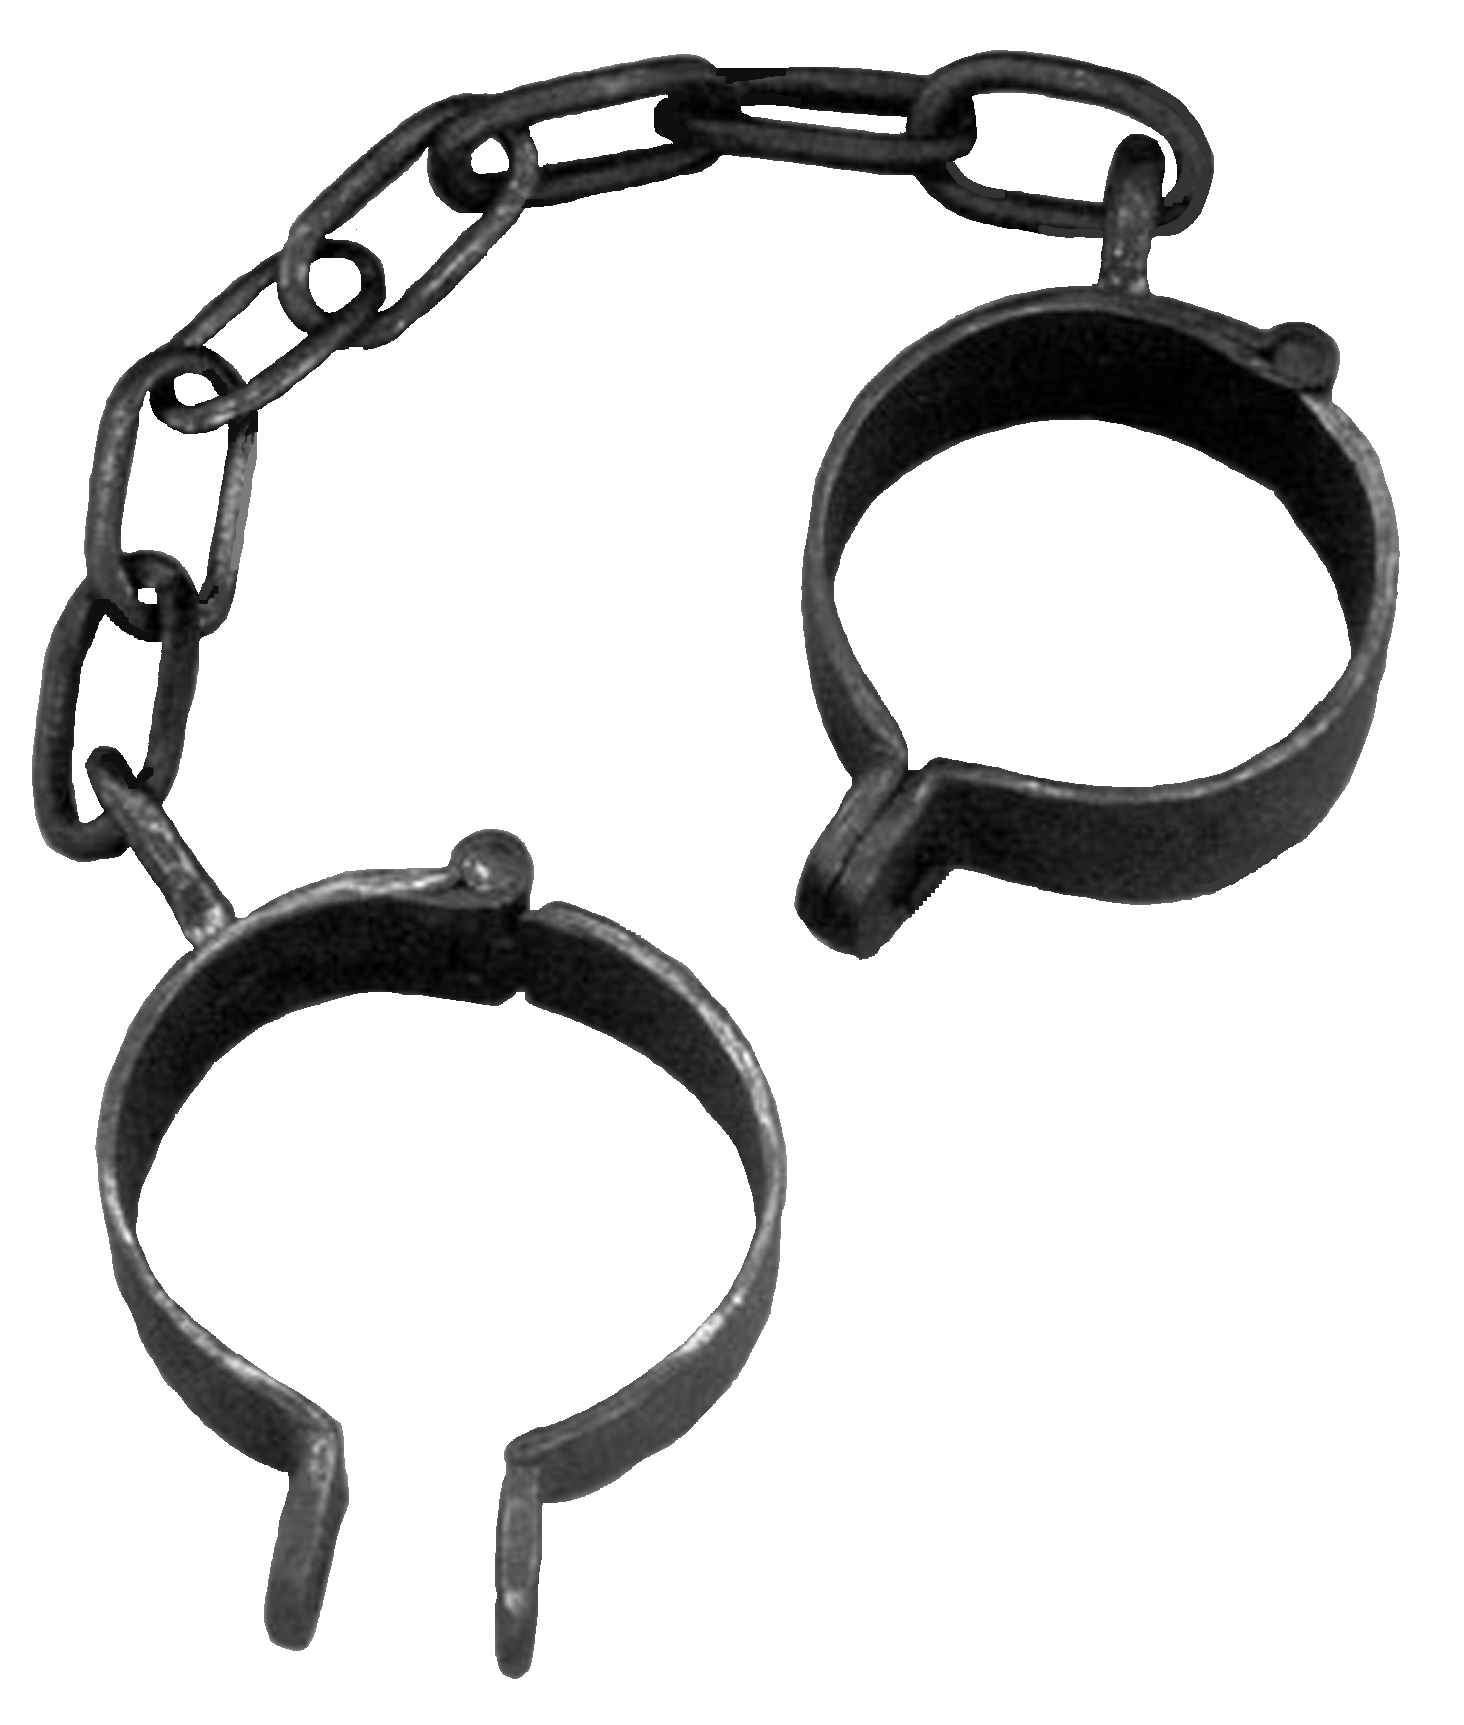 Page title . Slavery clipart handcuffs